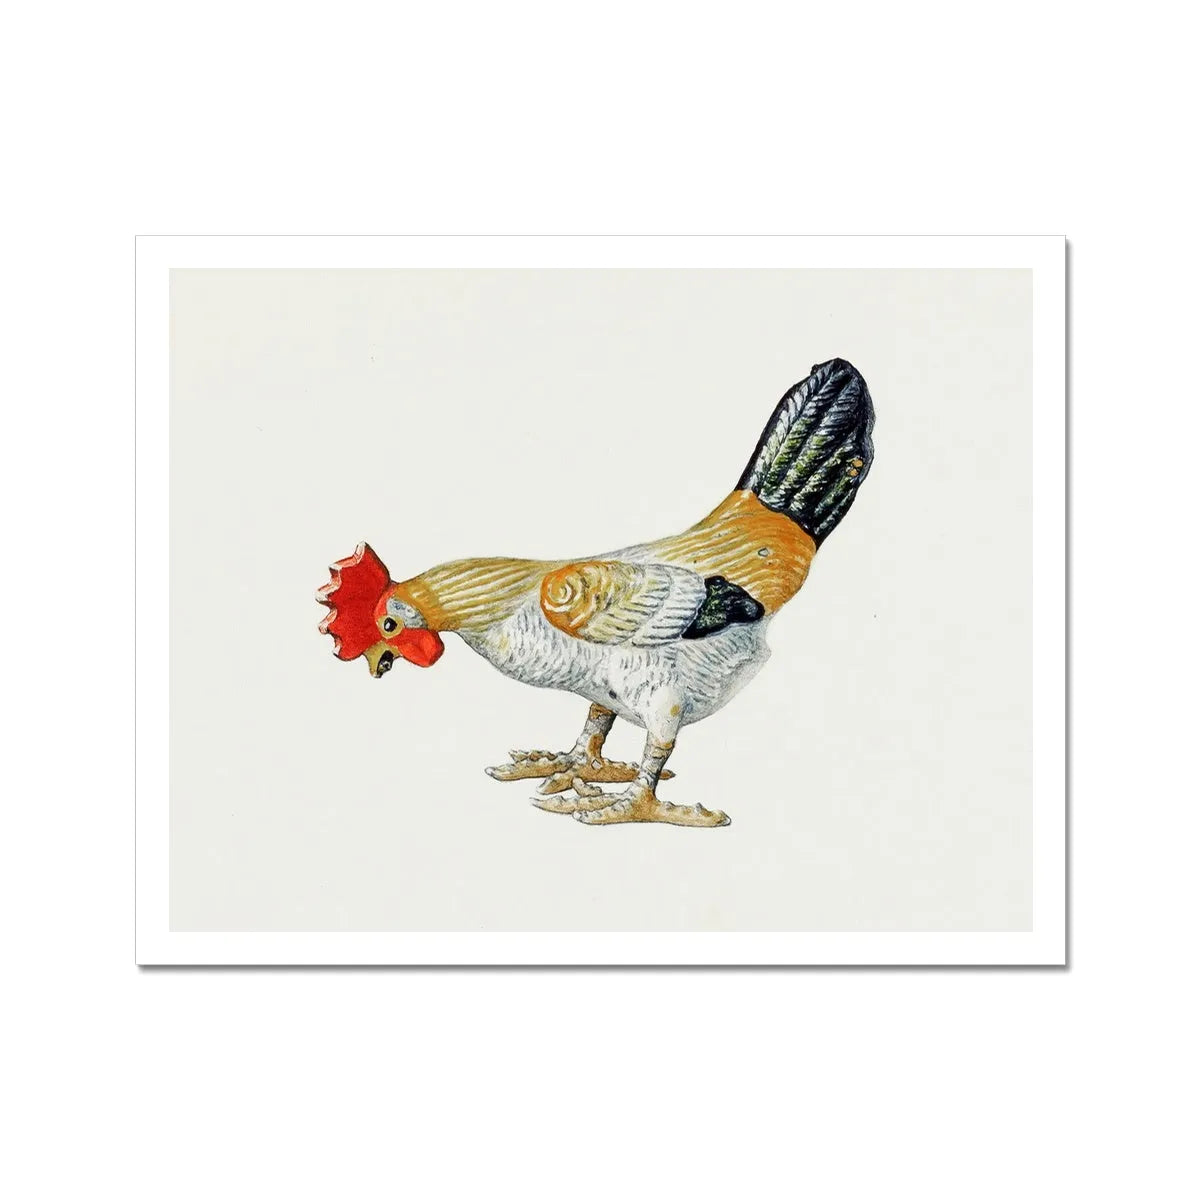 Toy Rooster By Lillian Hunter Fine Art Print - 14’x11’ - Posters Prints & Visual Artwork - Aesthetic Art